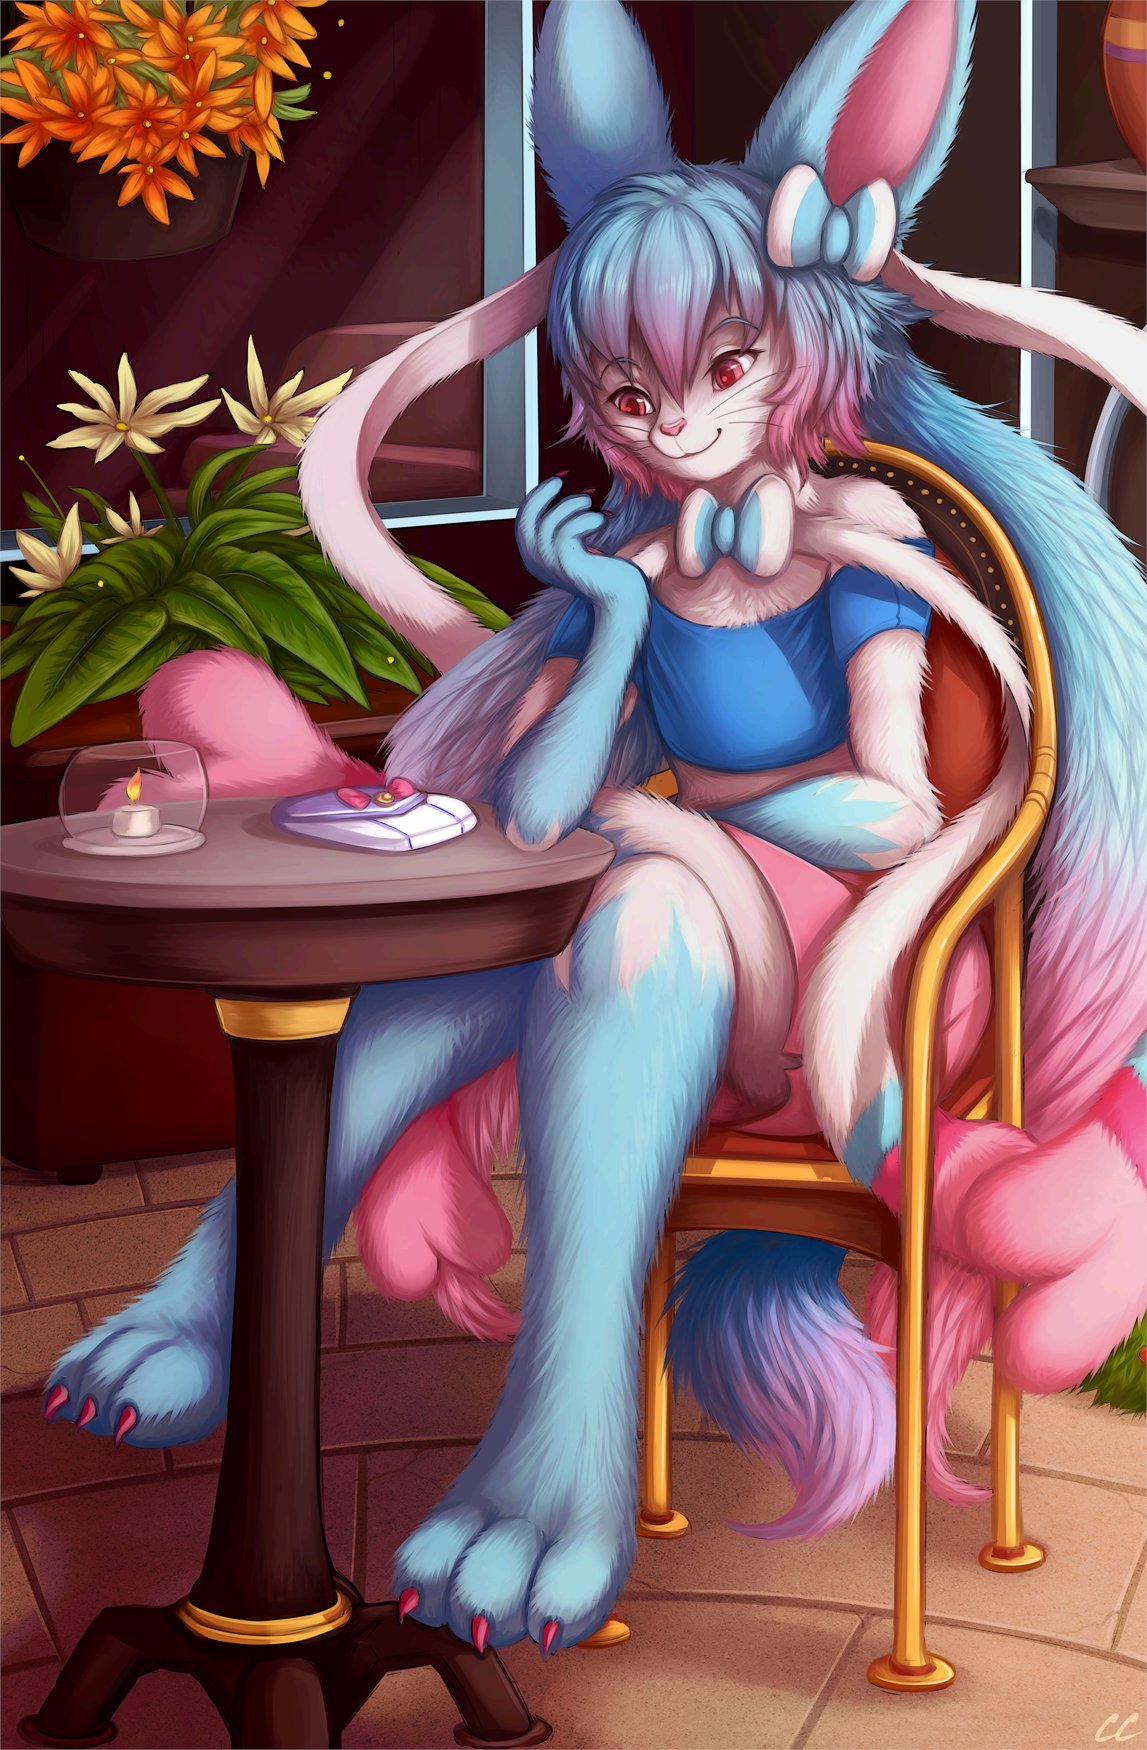 “Frostie the Sylveon

Completed live on stream at Runty Ink...